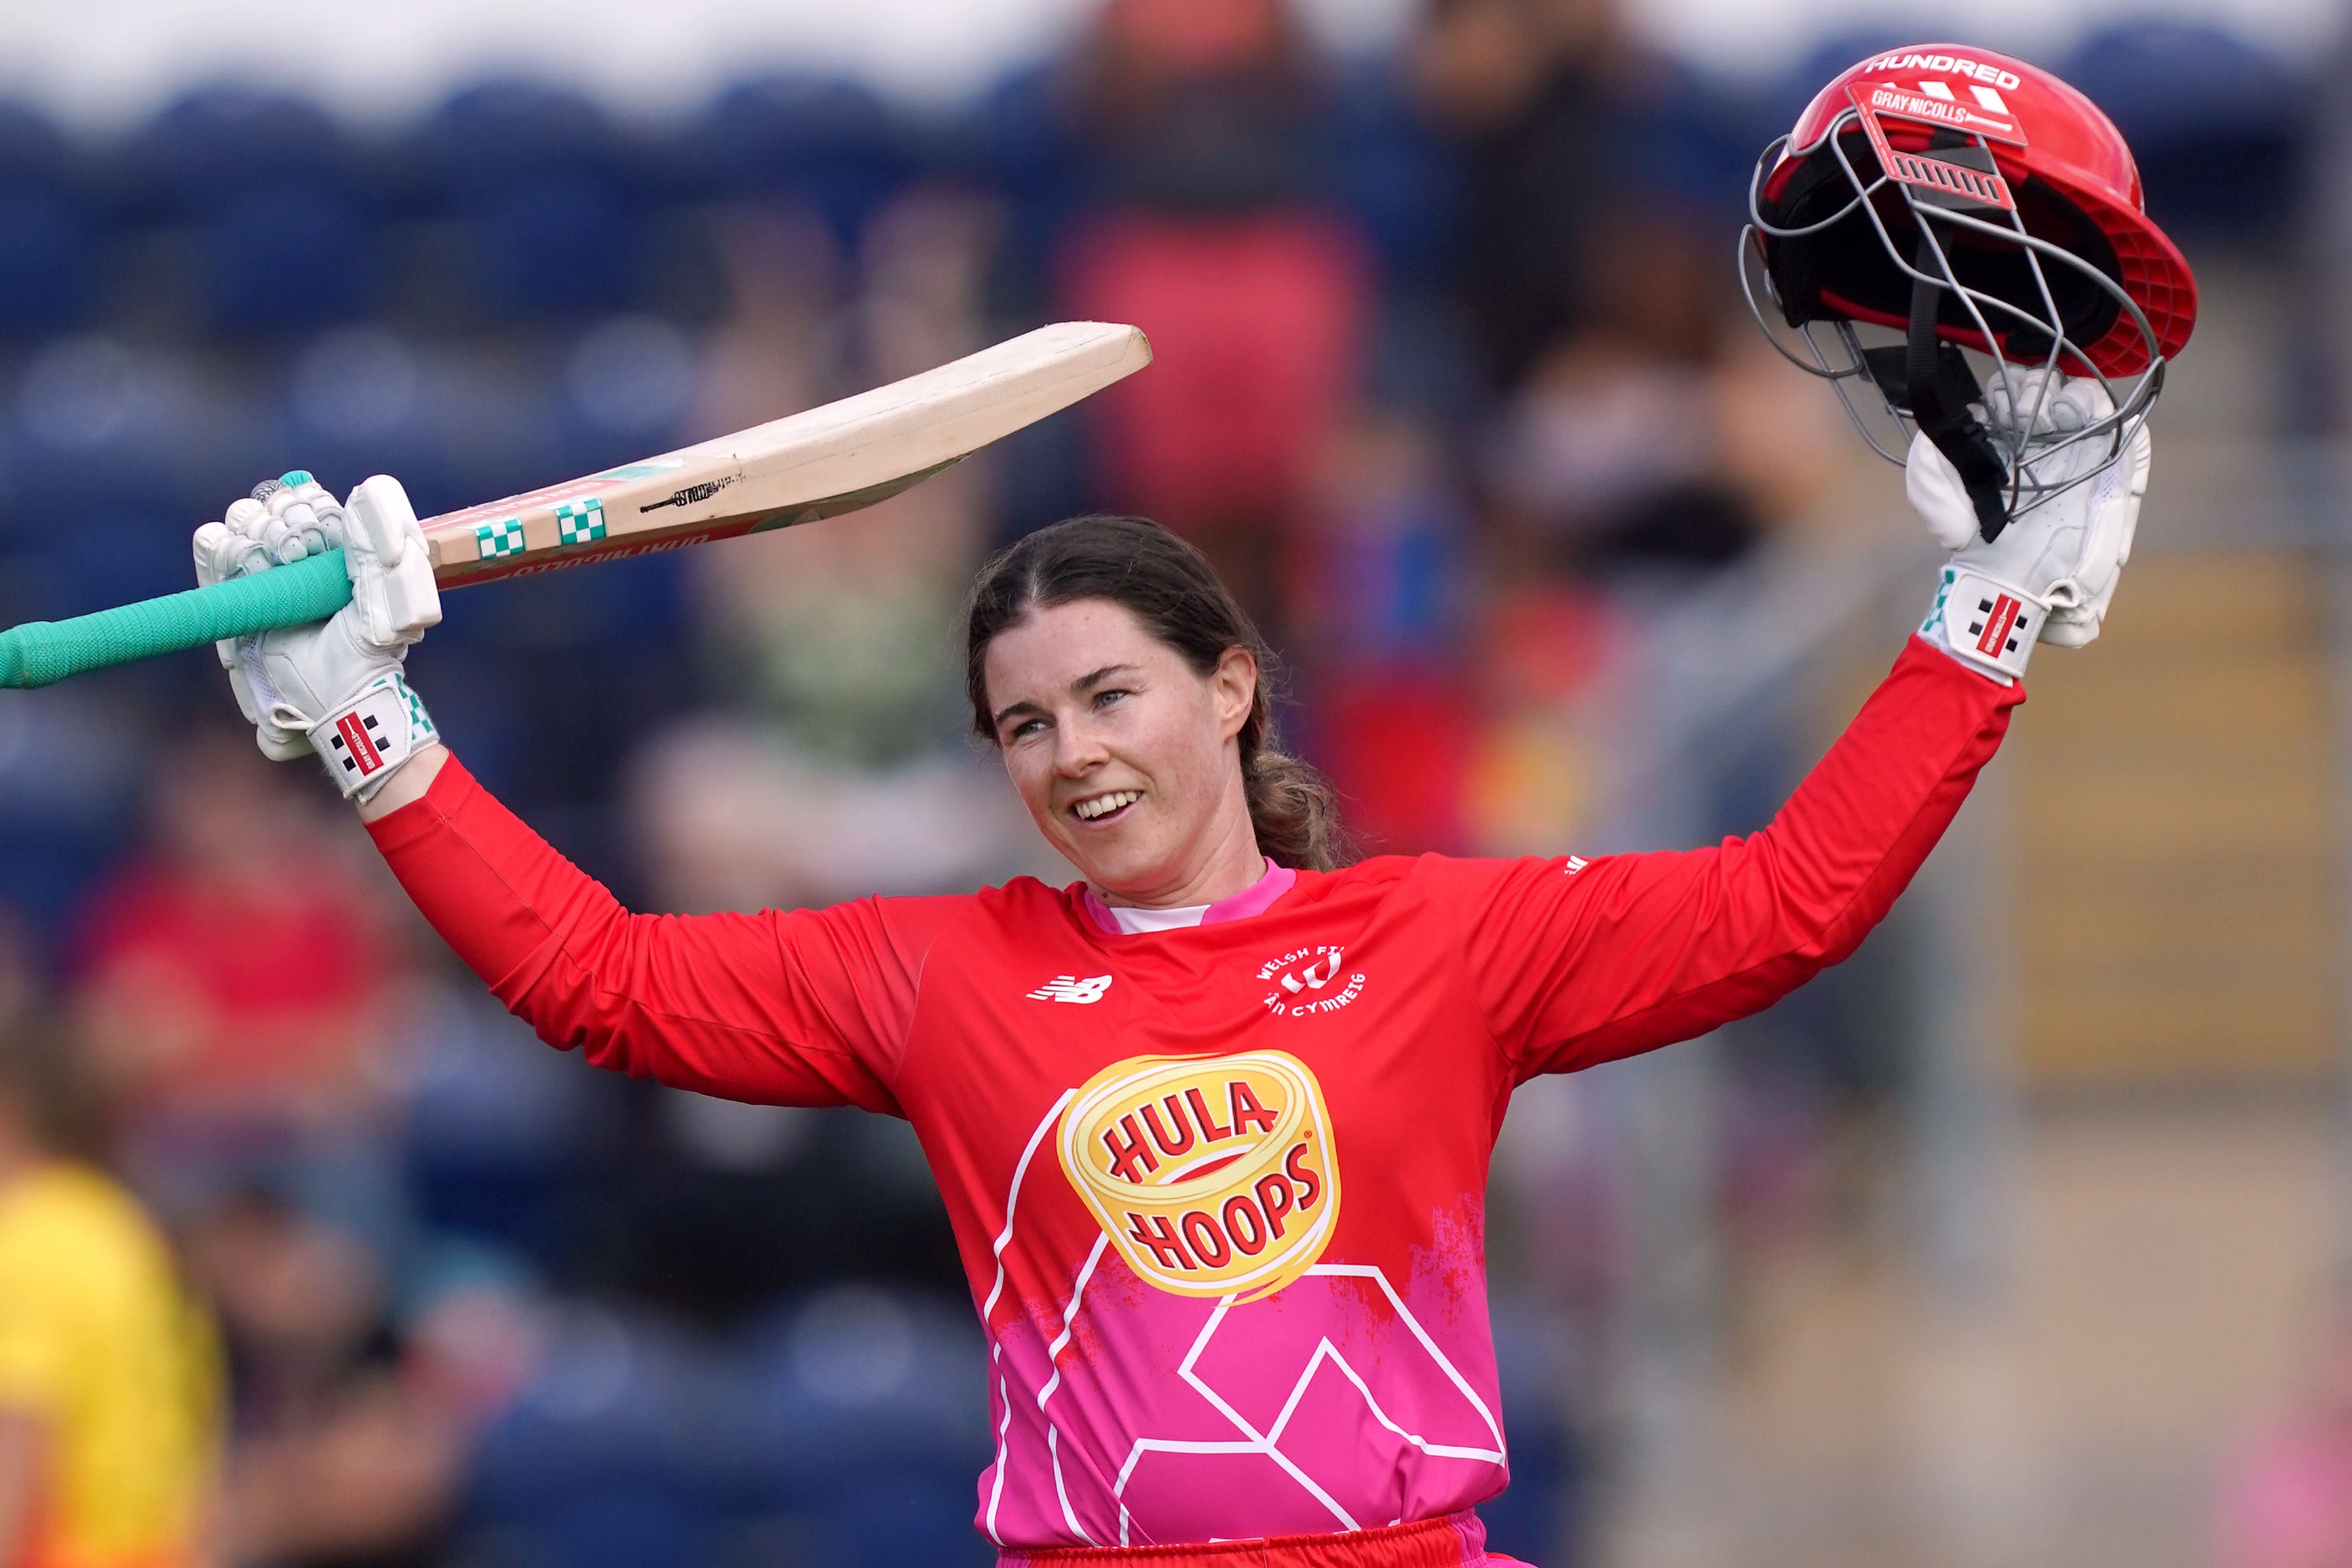 Tammy Beaumont has enjoyed a stellar year and highlighted some of the biggest issues in women’s sport